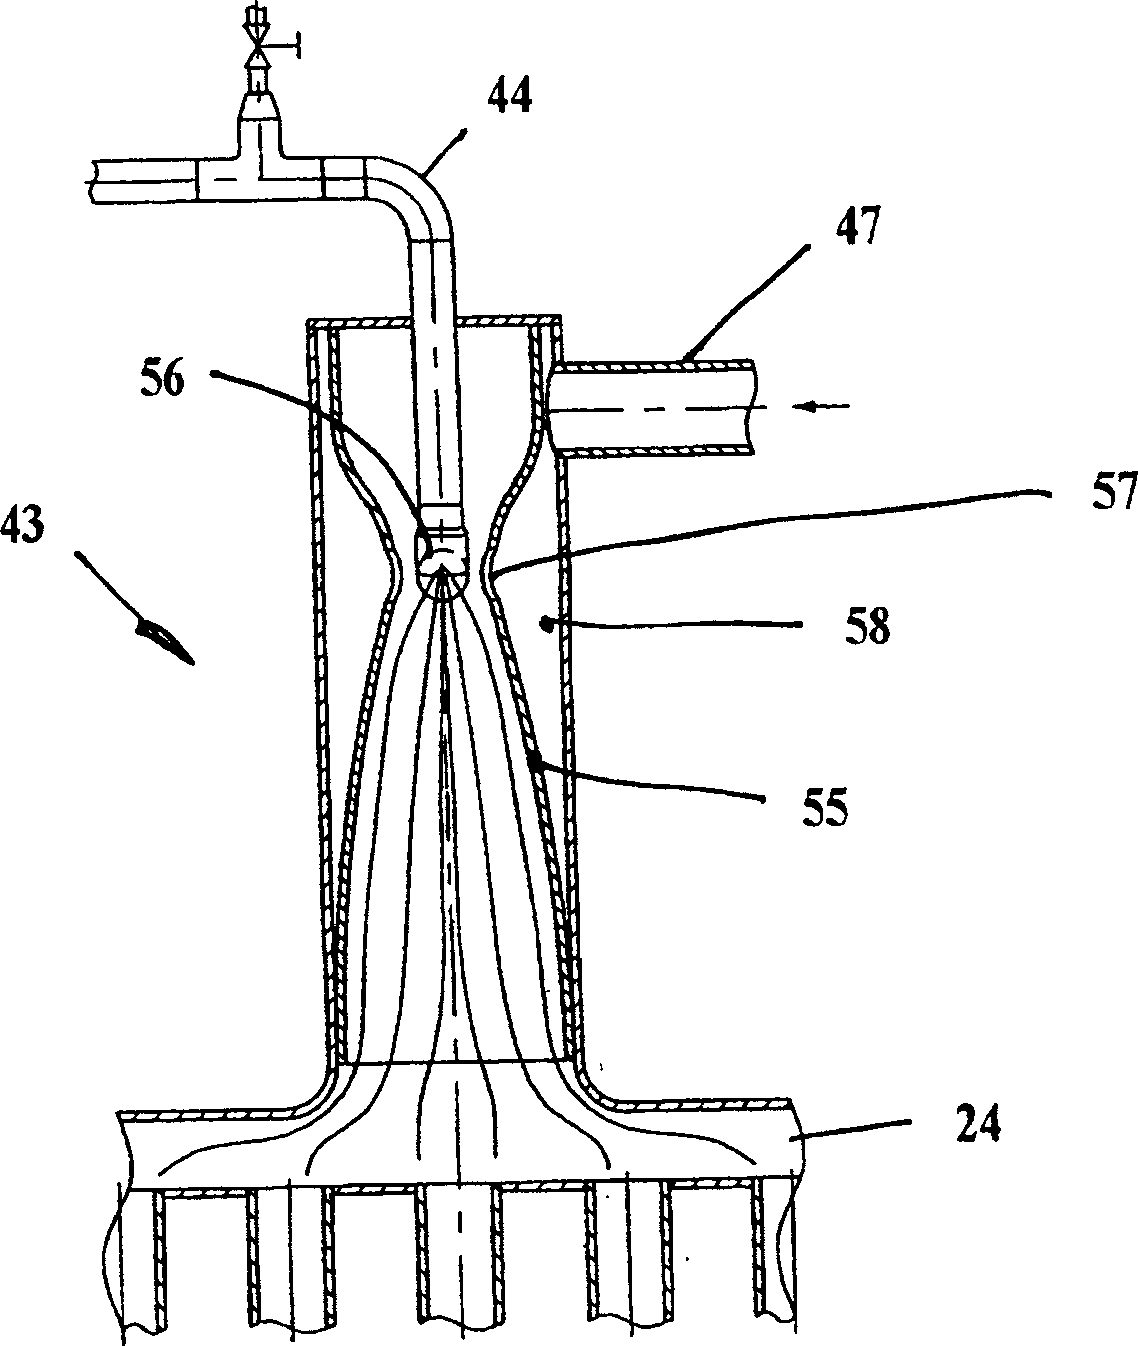 Method and device for producing a pure liquid from a crude liquid